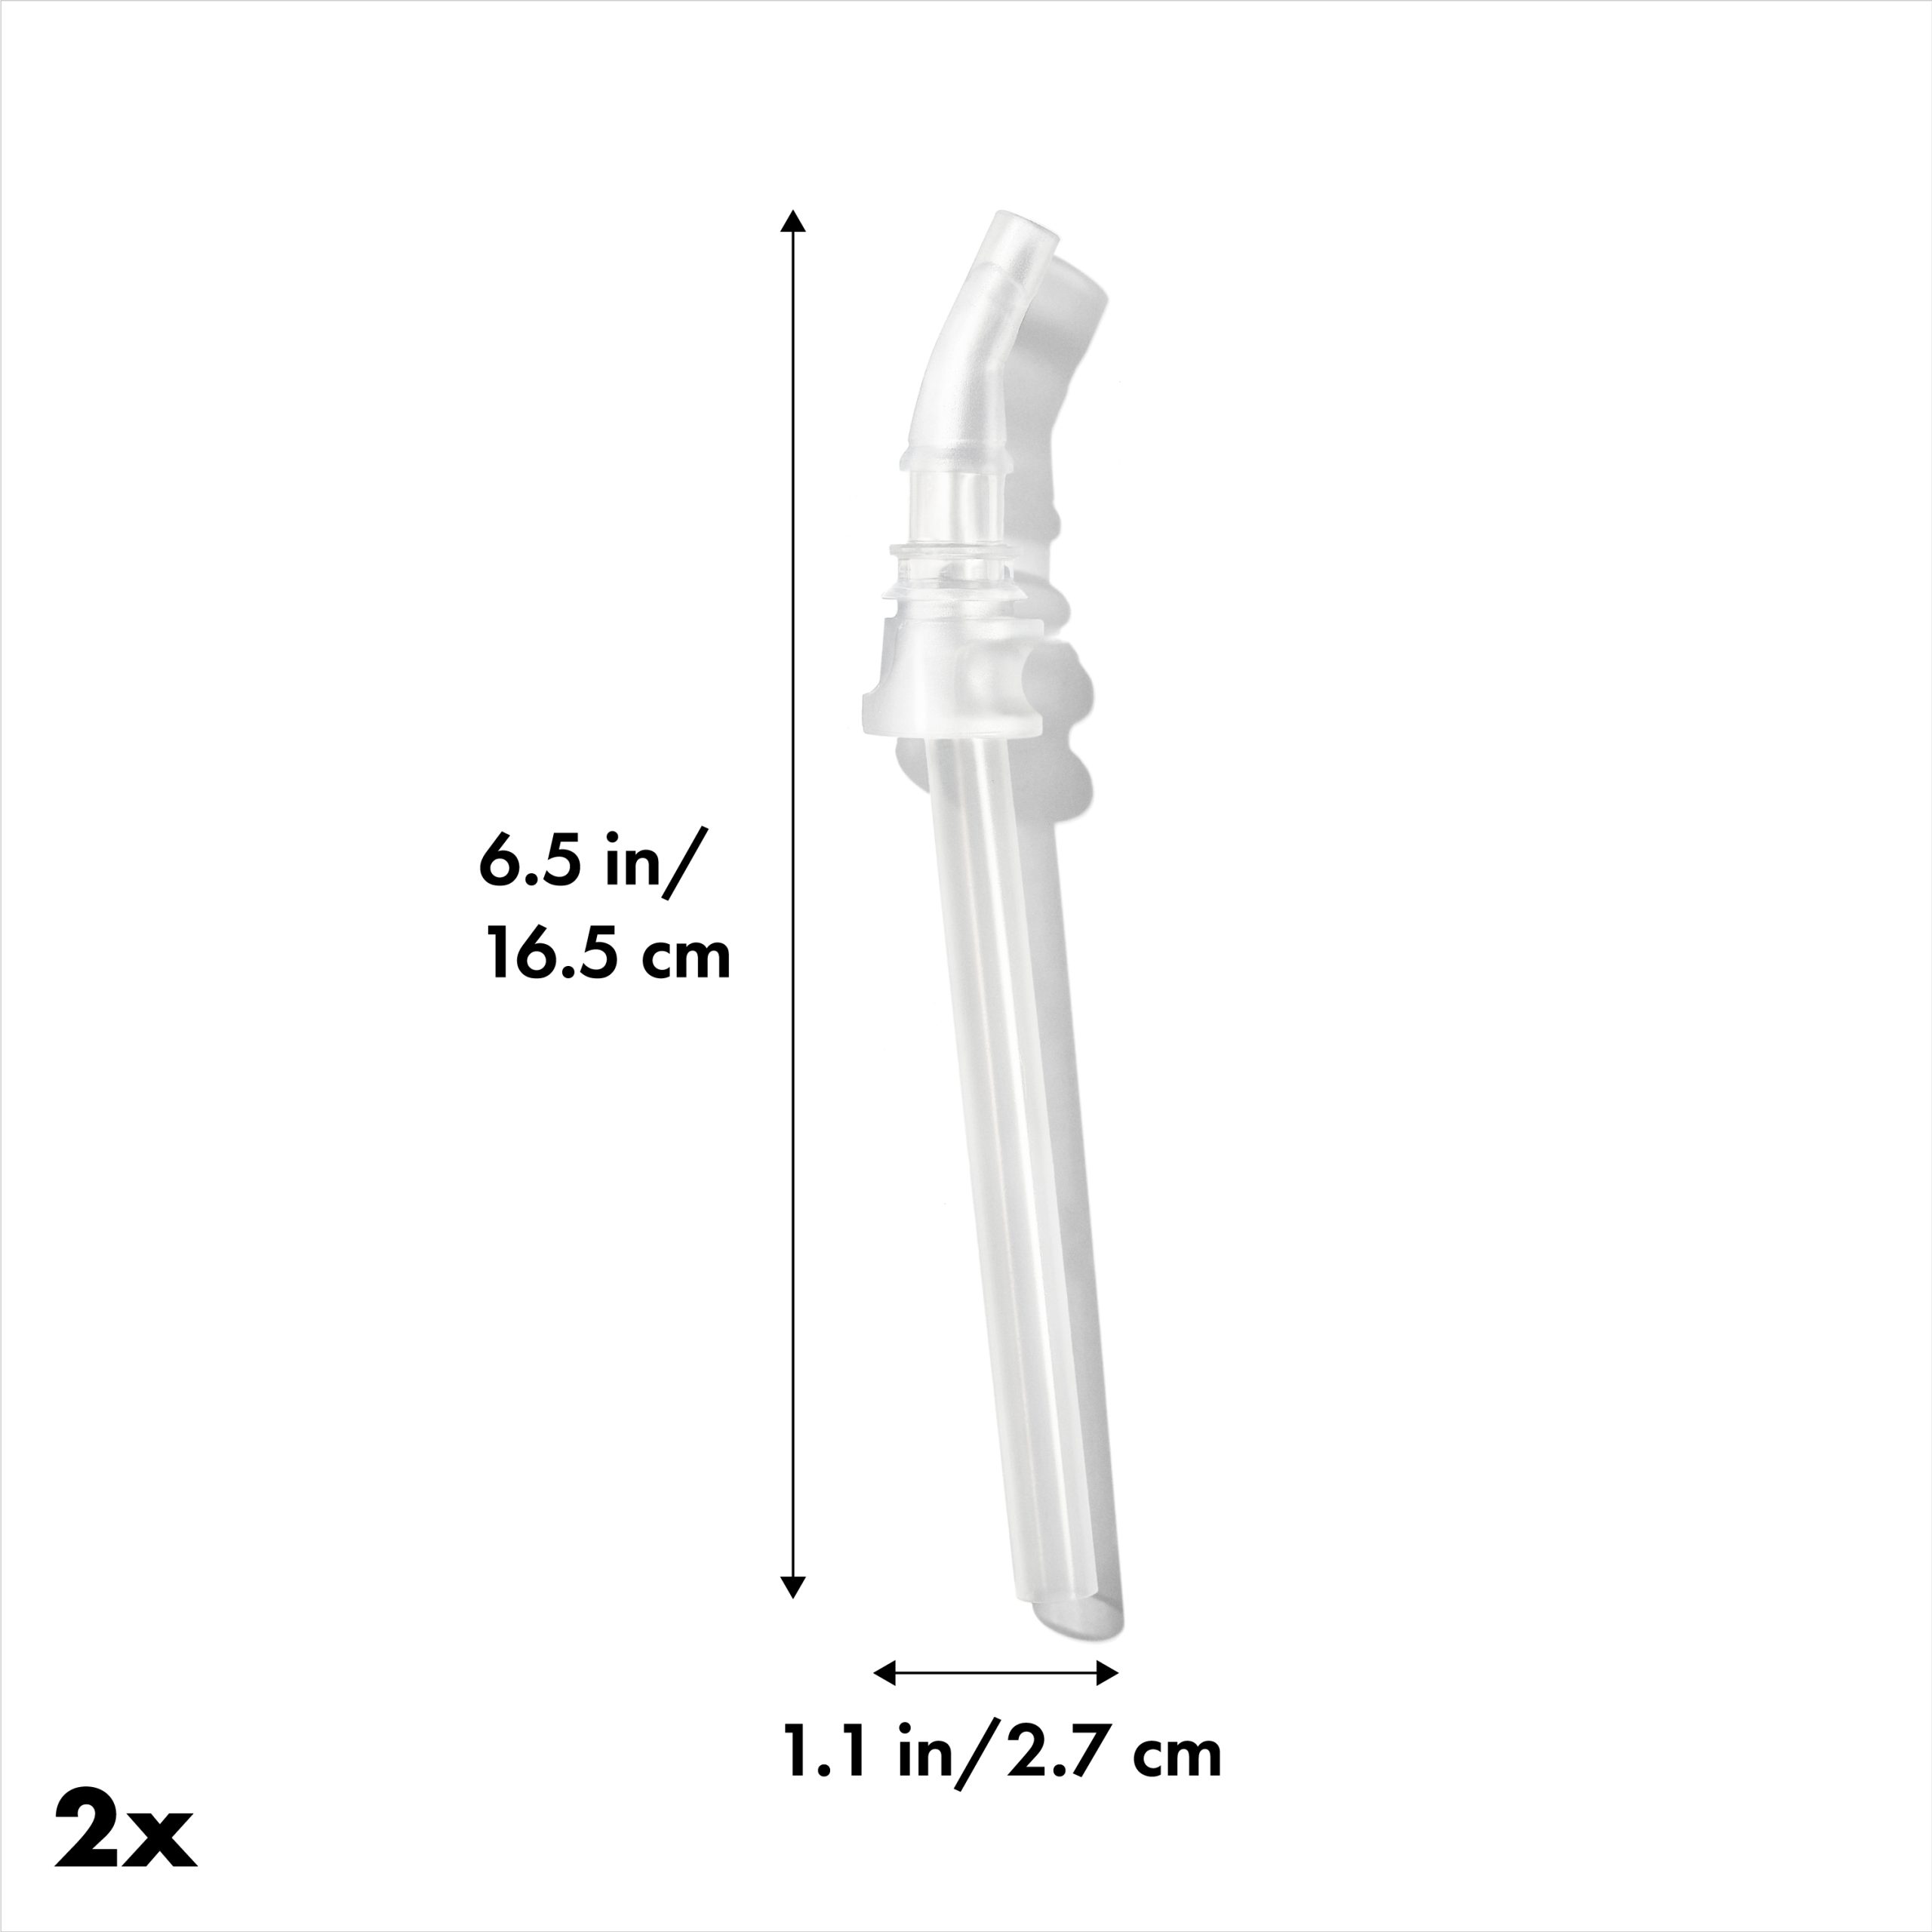 OXO Tot 2 Pack Replacement Straw Set, 6 Oz 